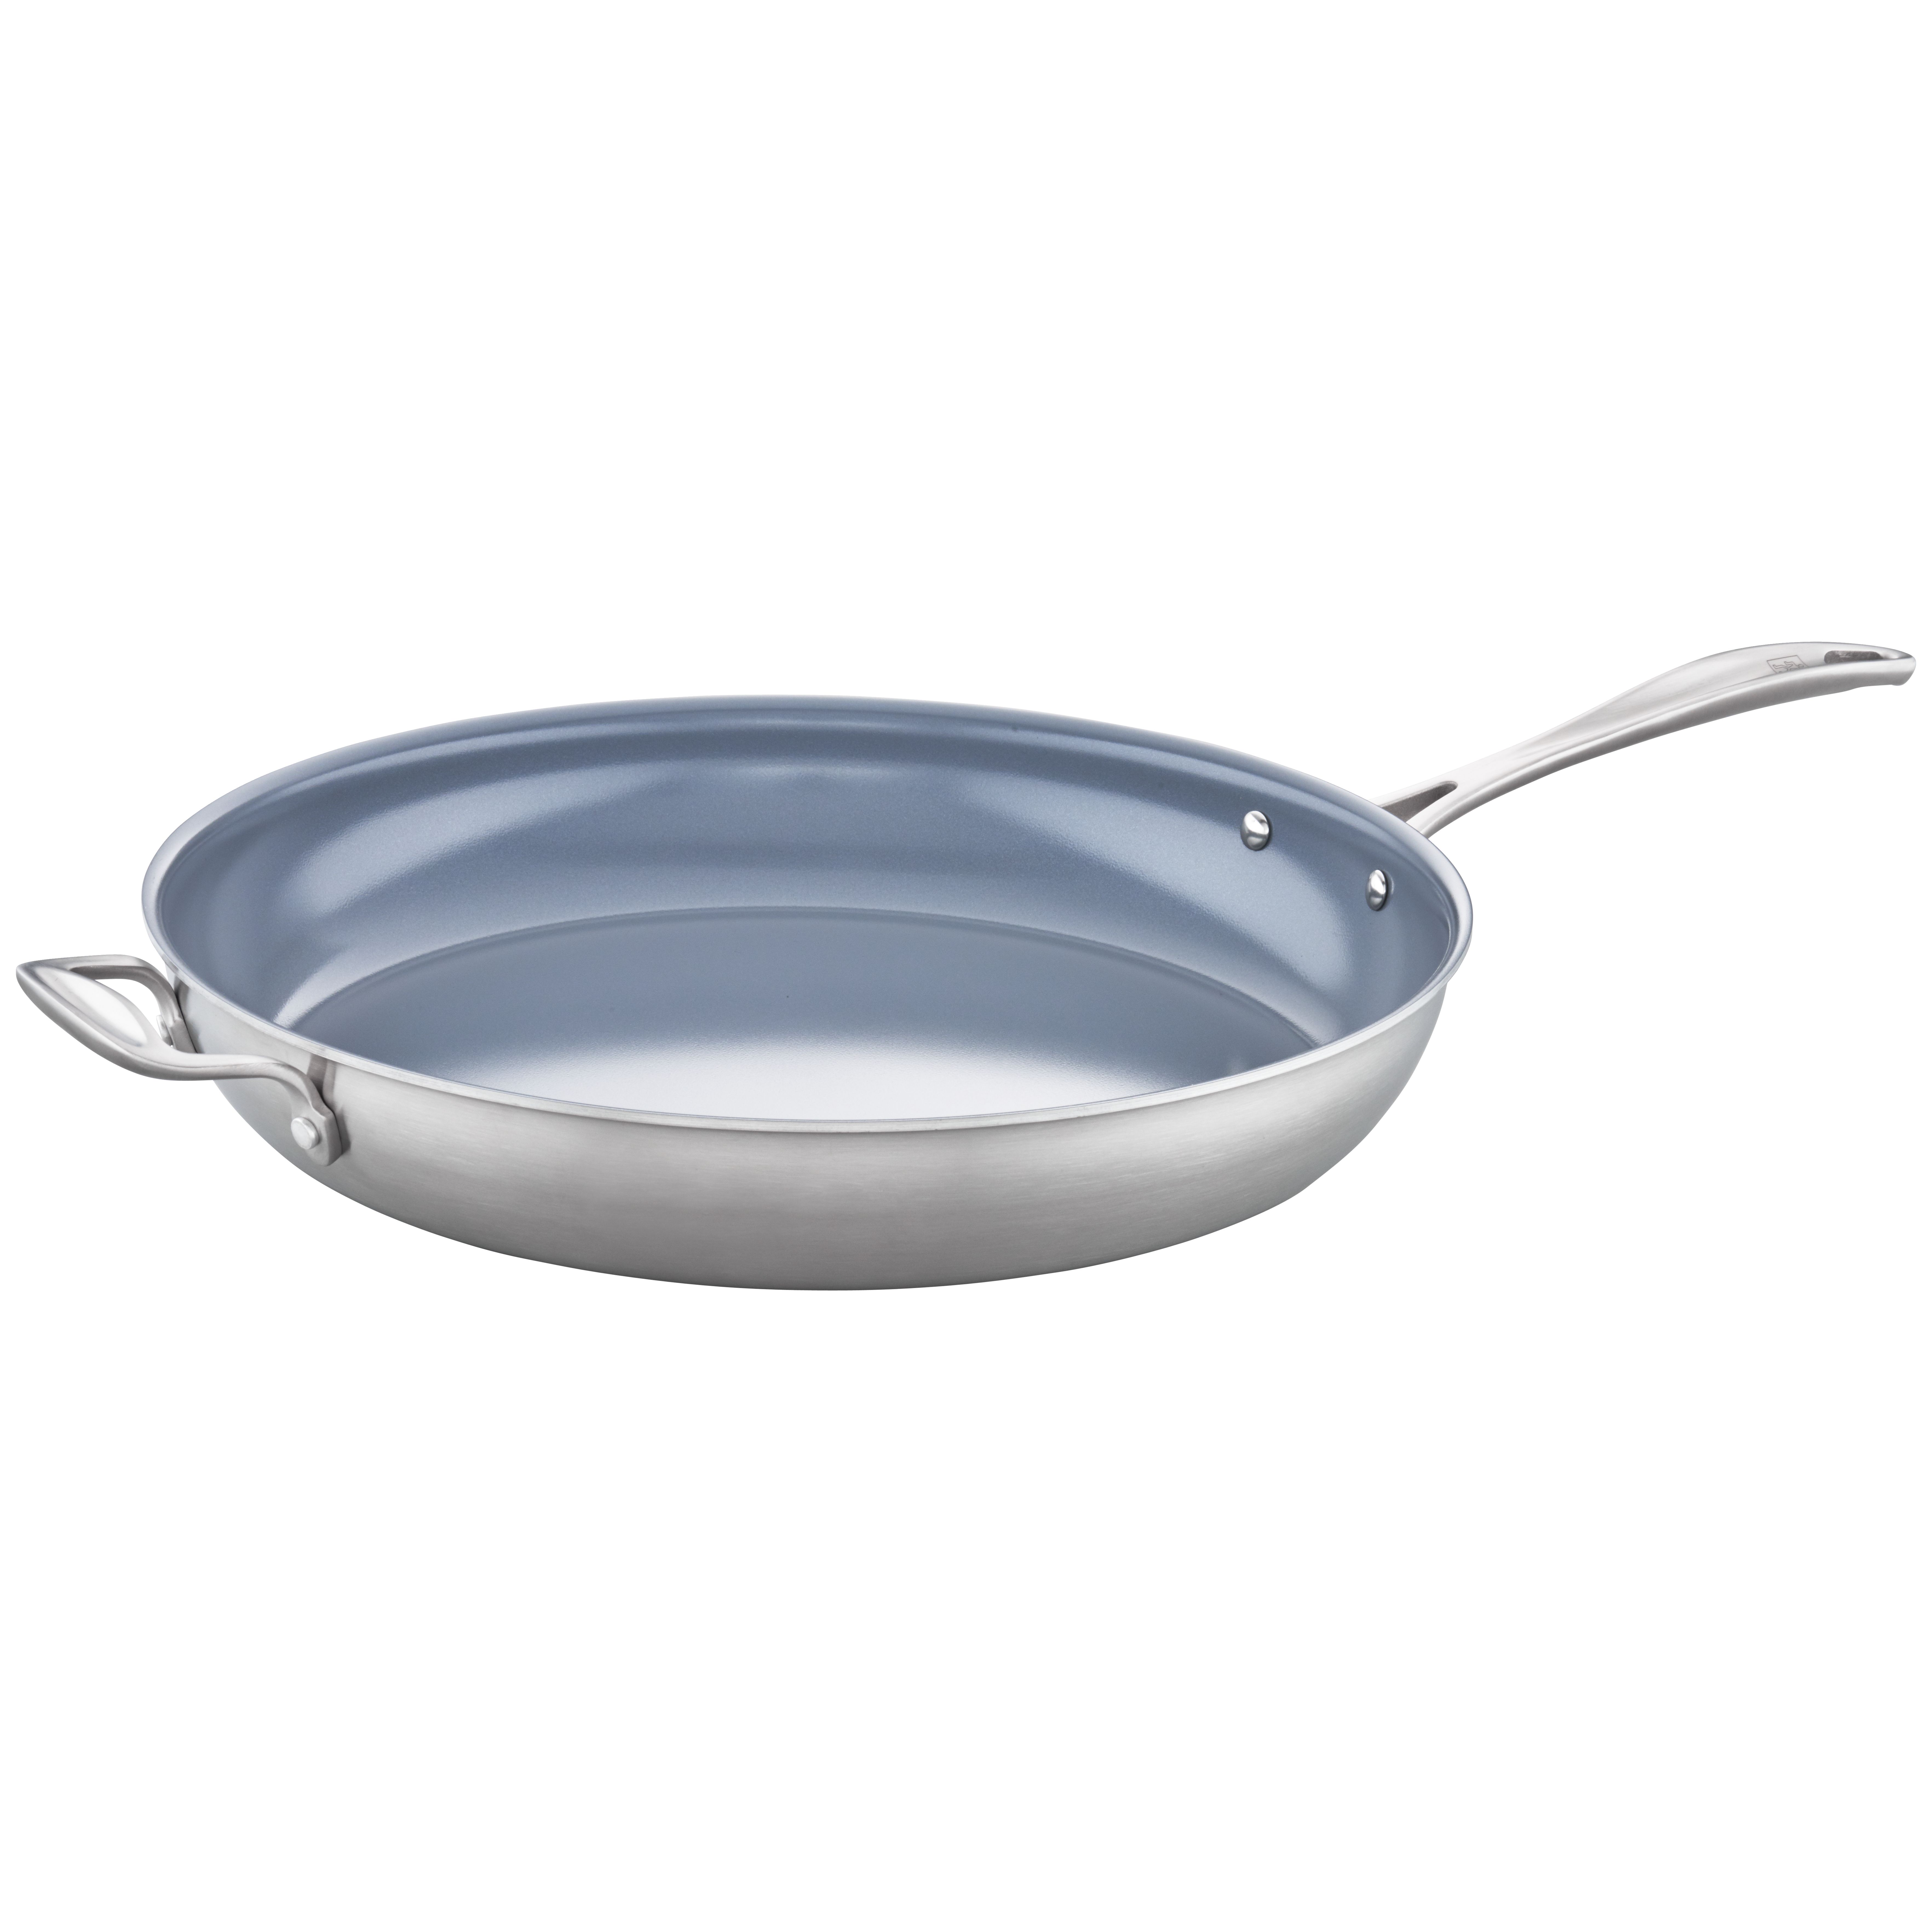 ZWILLING Spirit Ceramic Nonstick 14-inch, 18/10 Stainless Steel, Non-stick,  Frying pan